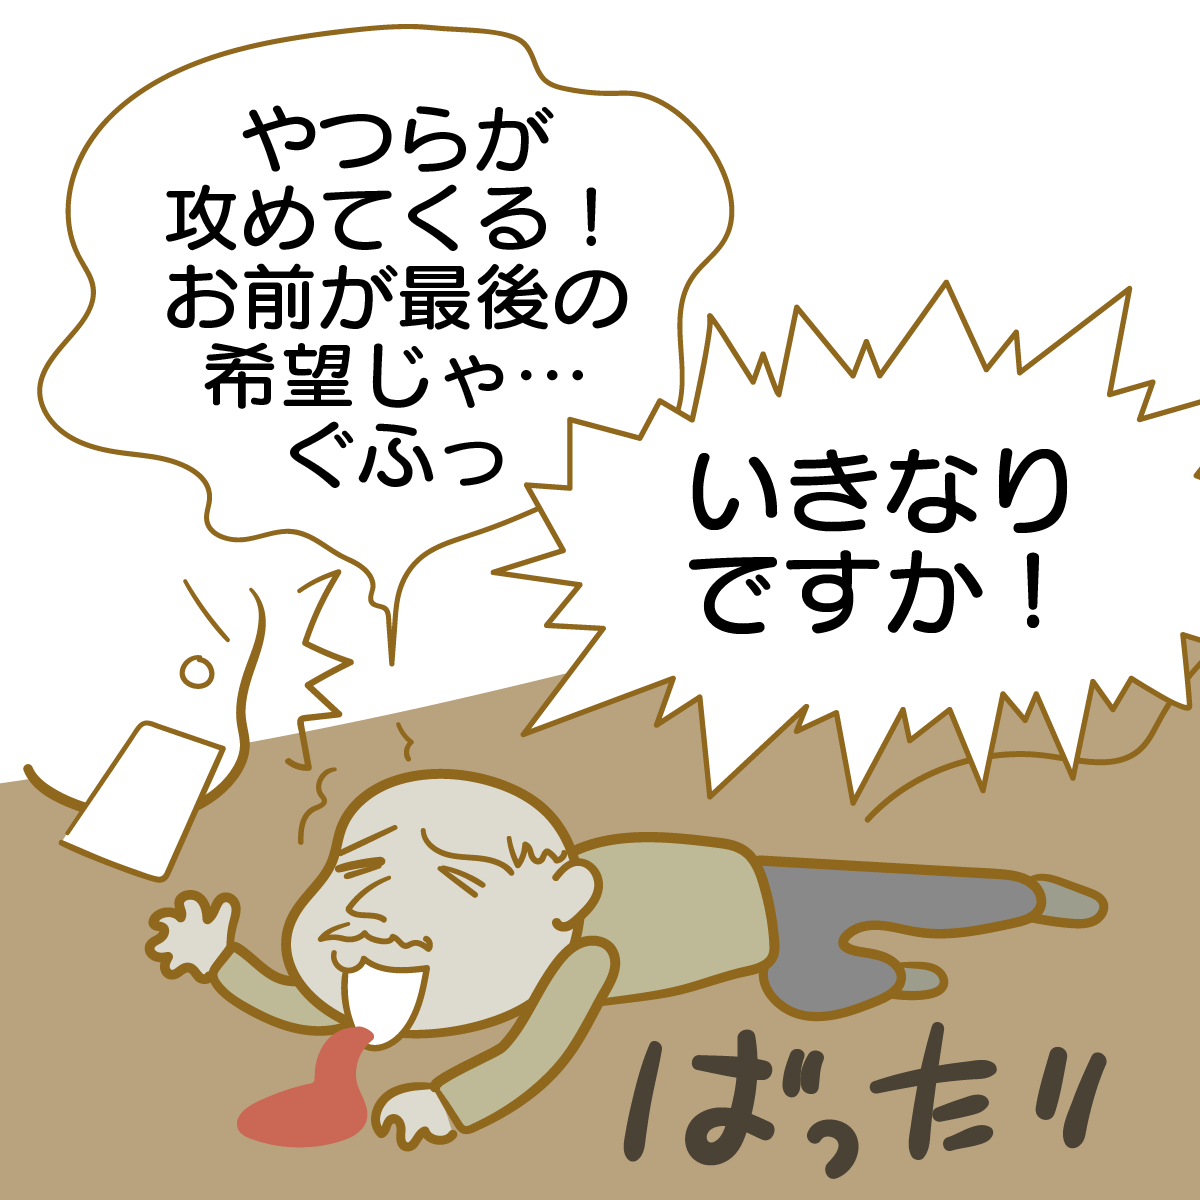 Dungeon Siege 1・来た見た勝った！[漫画日記]アイキャッチ